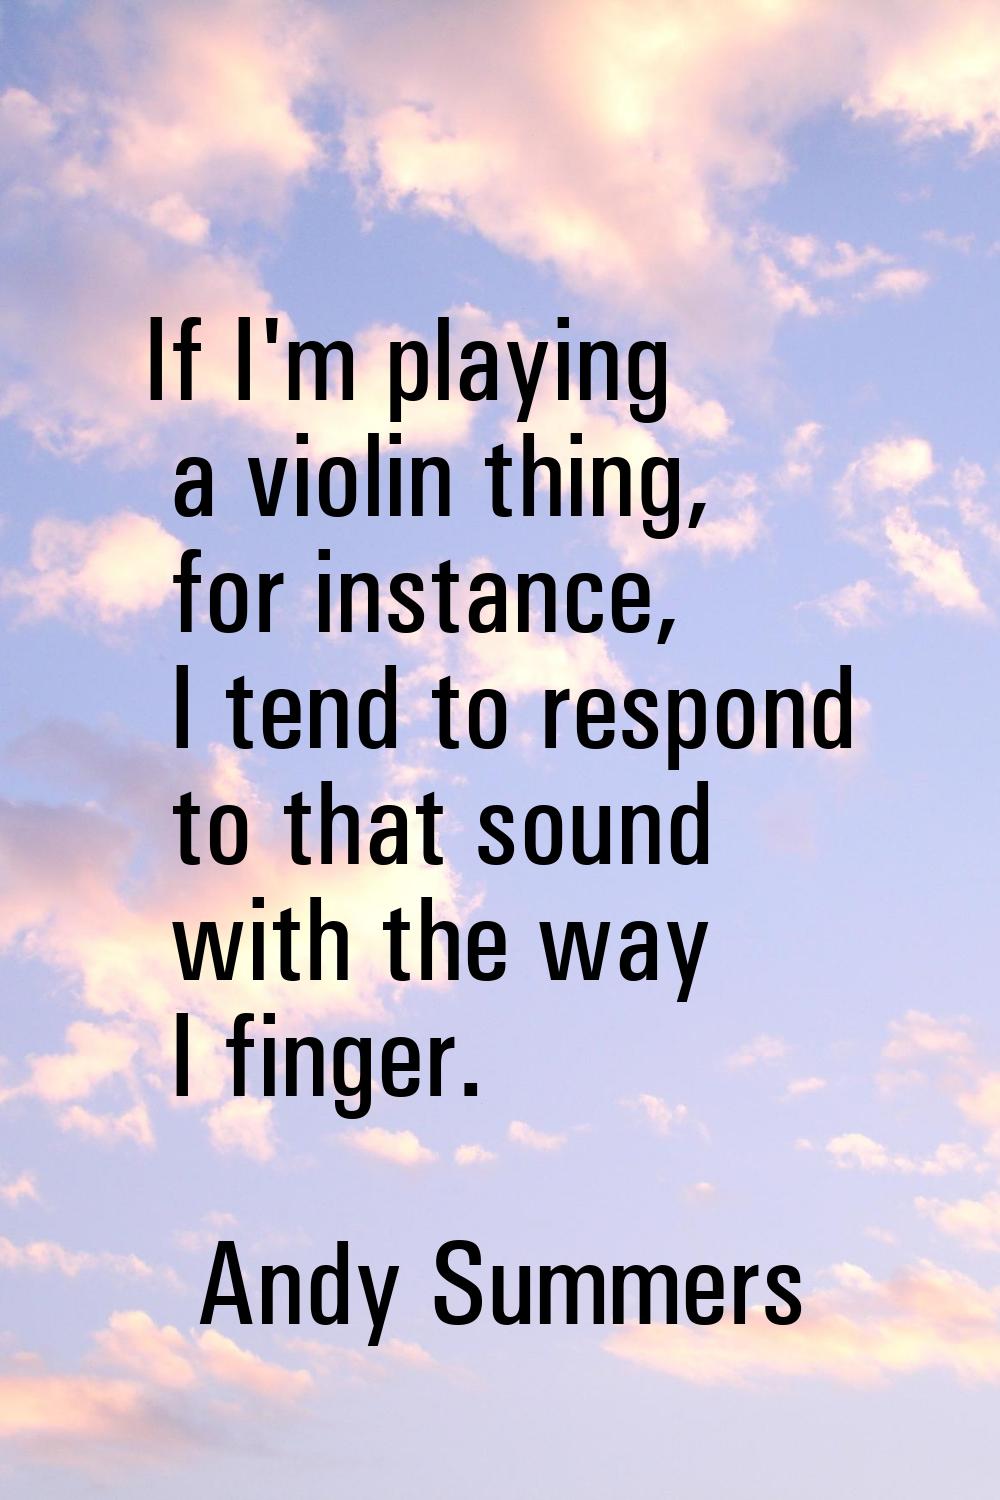 If I'm playing a violin thing, for instance, I tend to respond to that sound with the way I finger.